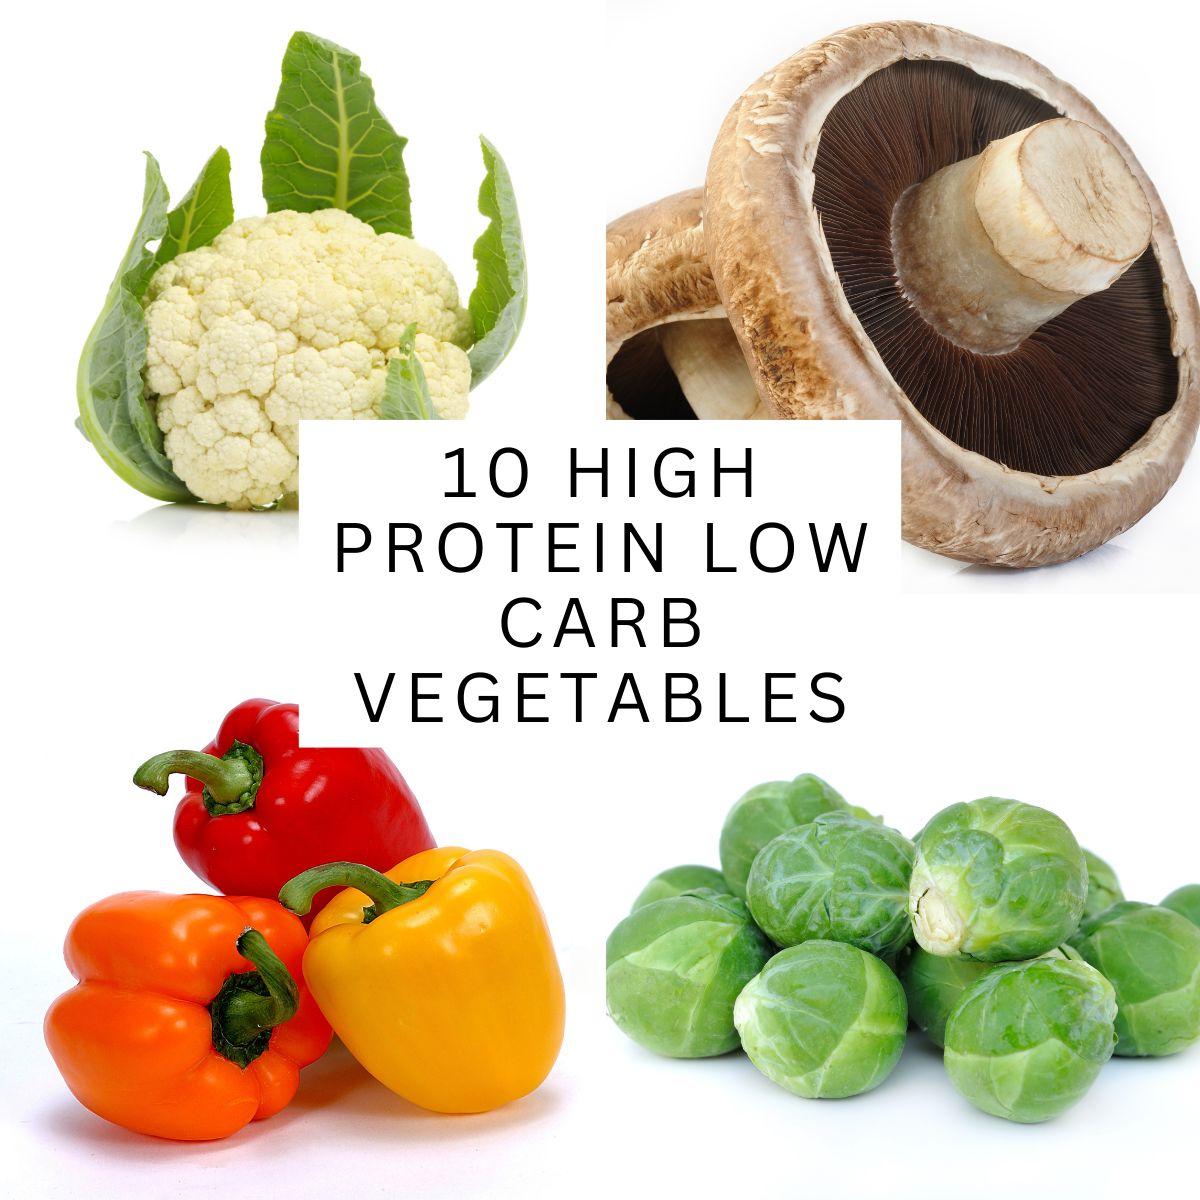 10 High Protein Low Carb Vegetables - Keto Low Carb Vegetarian Recipes